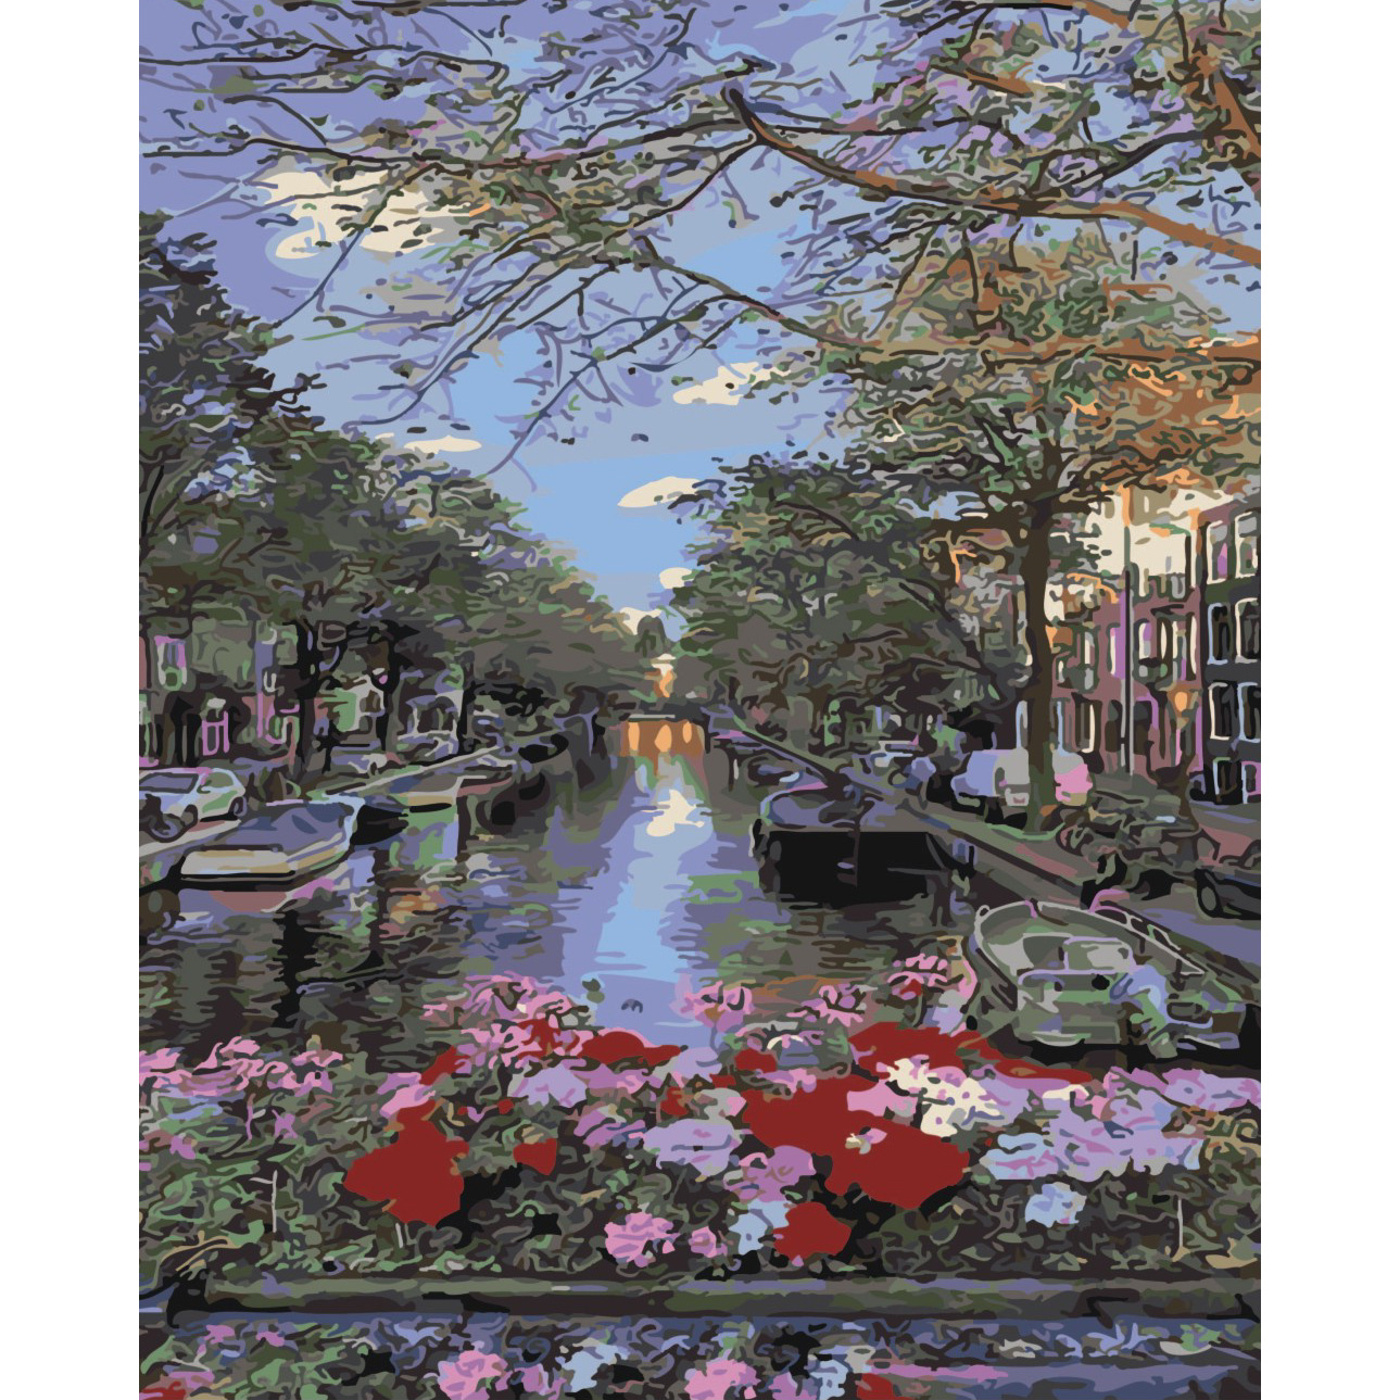 Set for painting by numbers SY6475 "Venetian Canal", size 40x50 cm